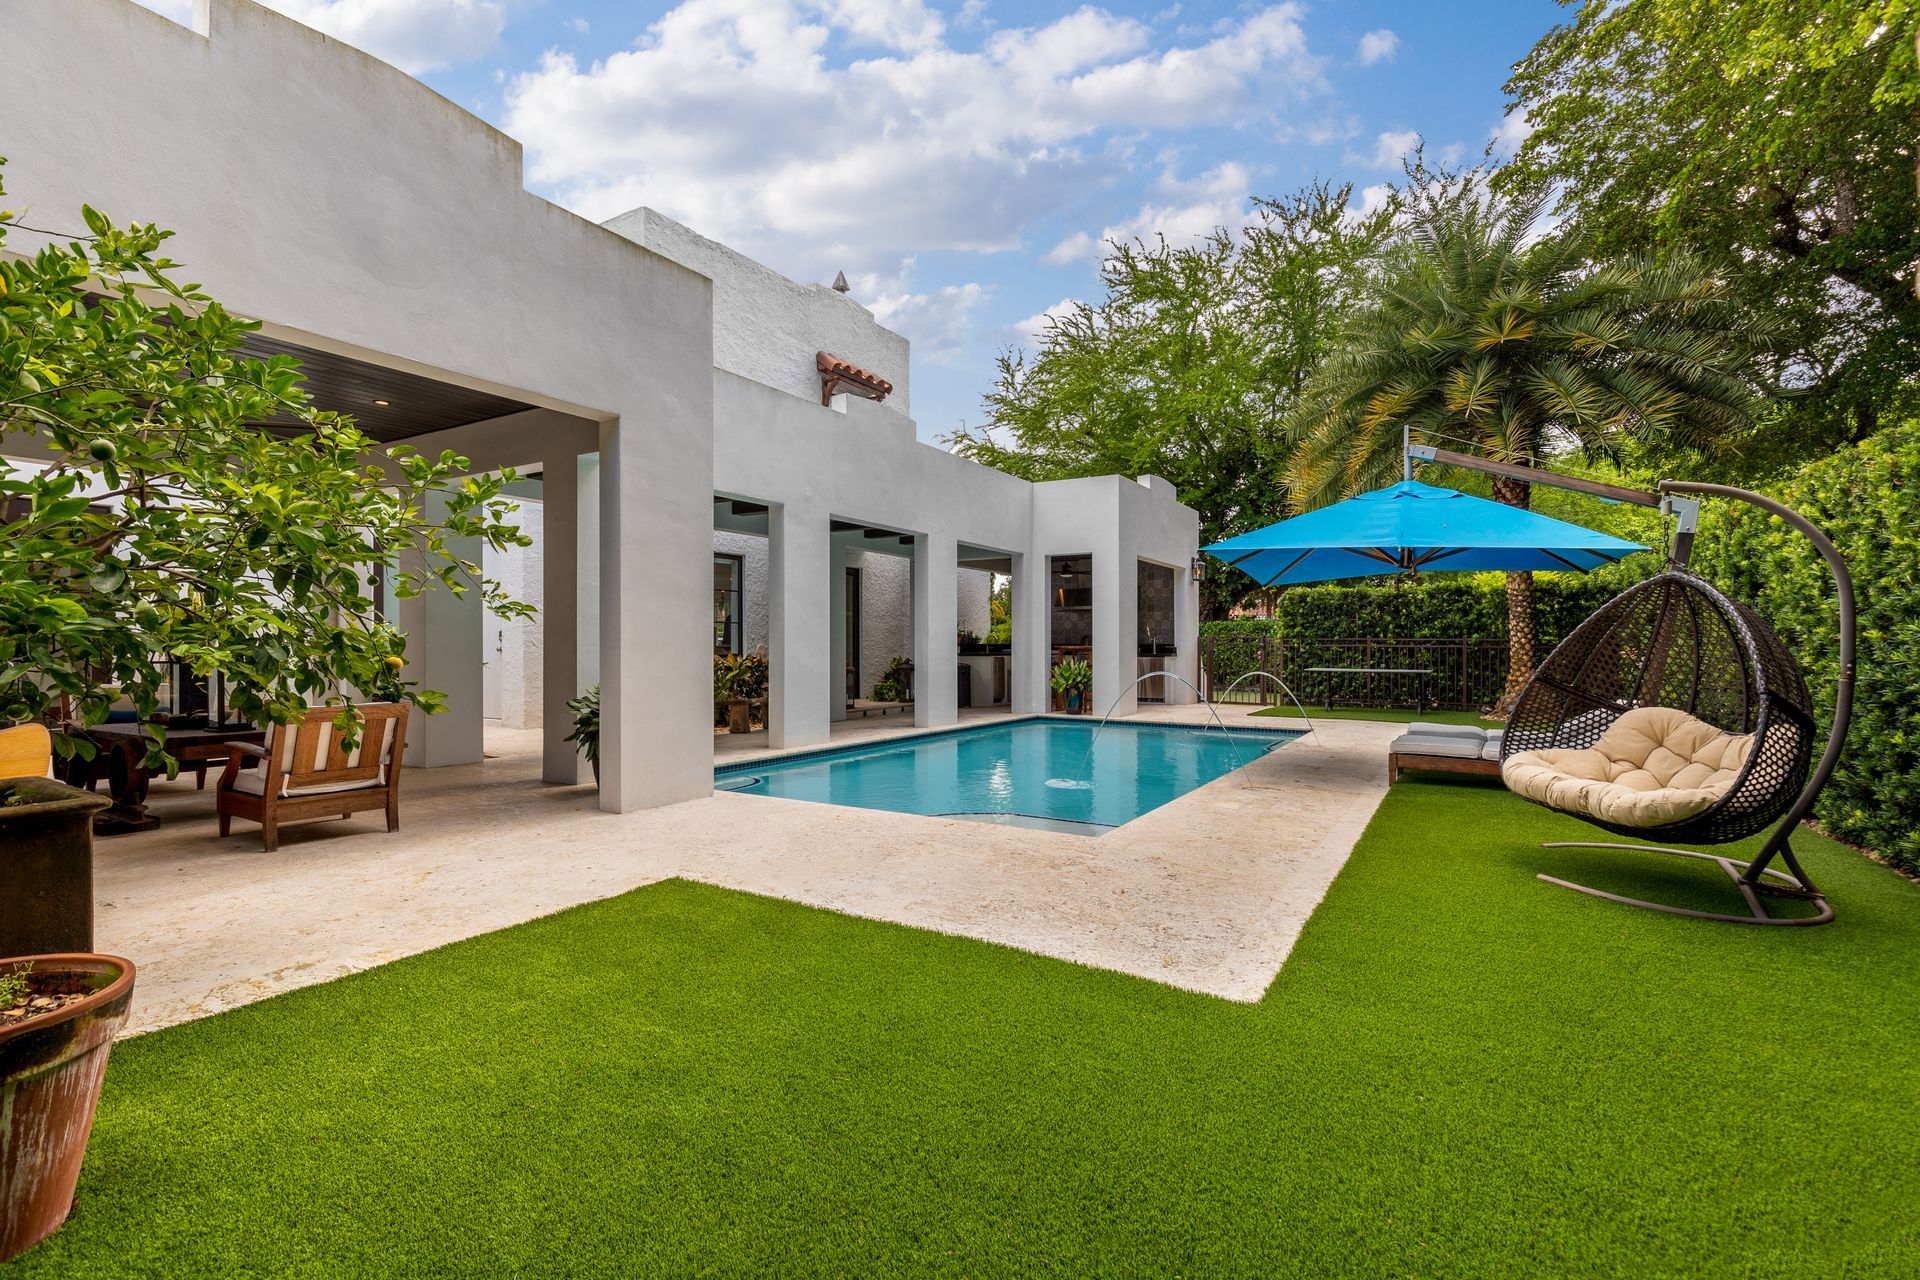 Benefits of installing turf: Modern house with a pool and artificial turf